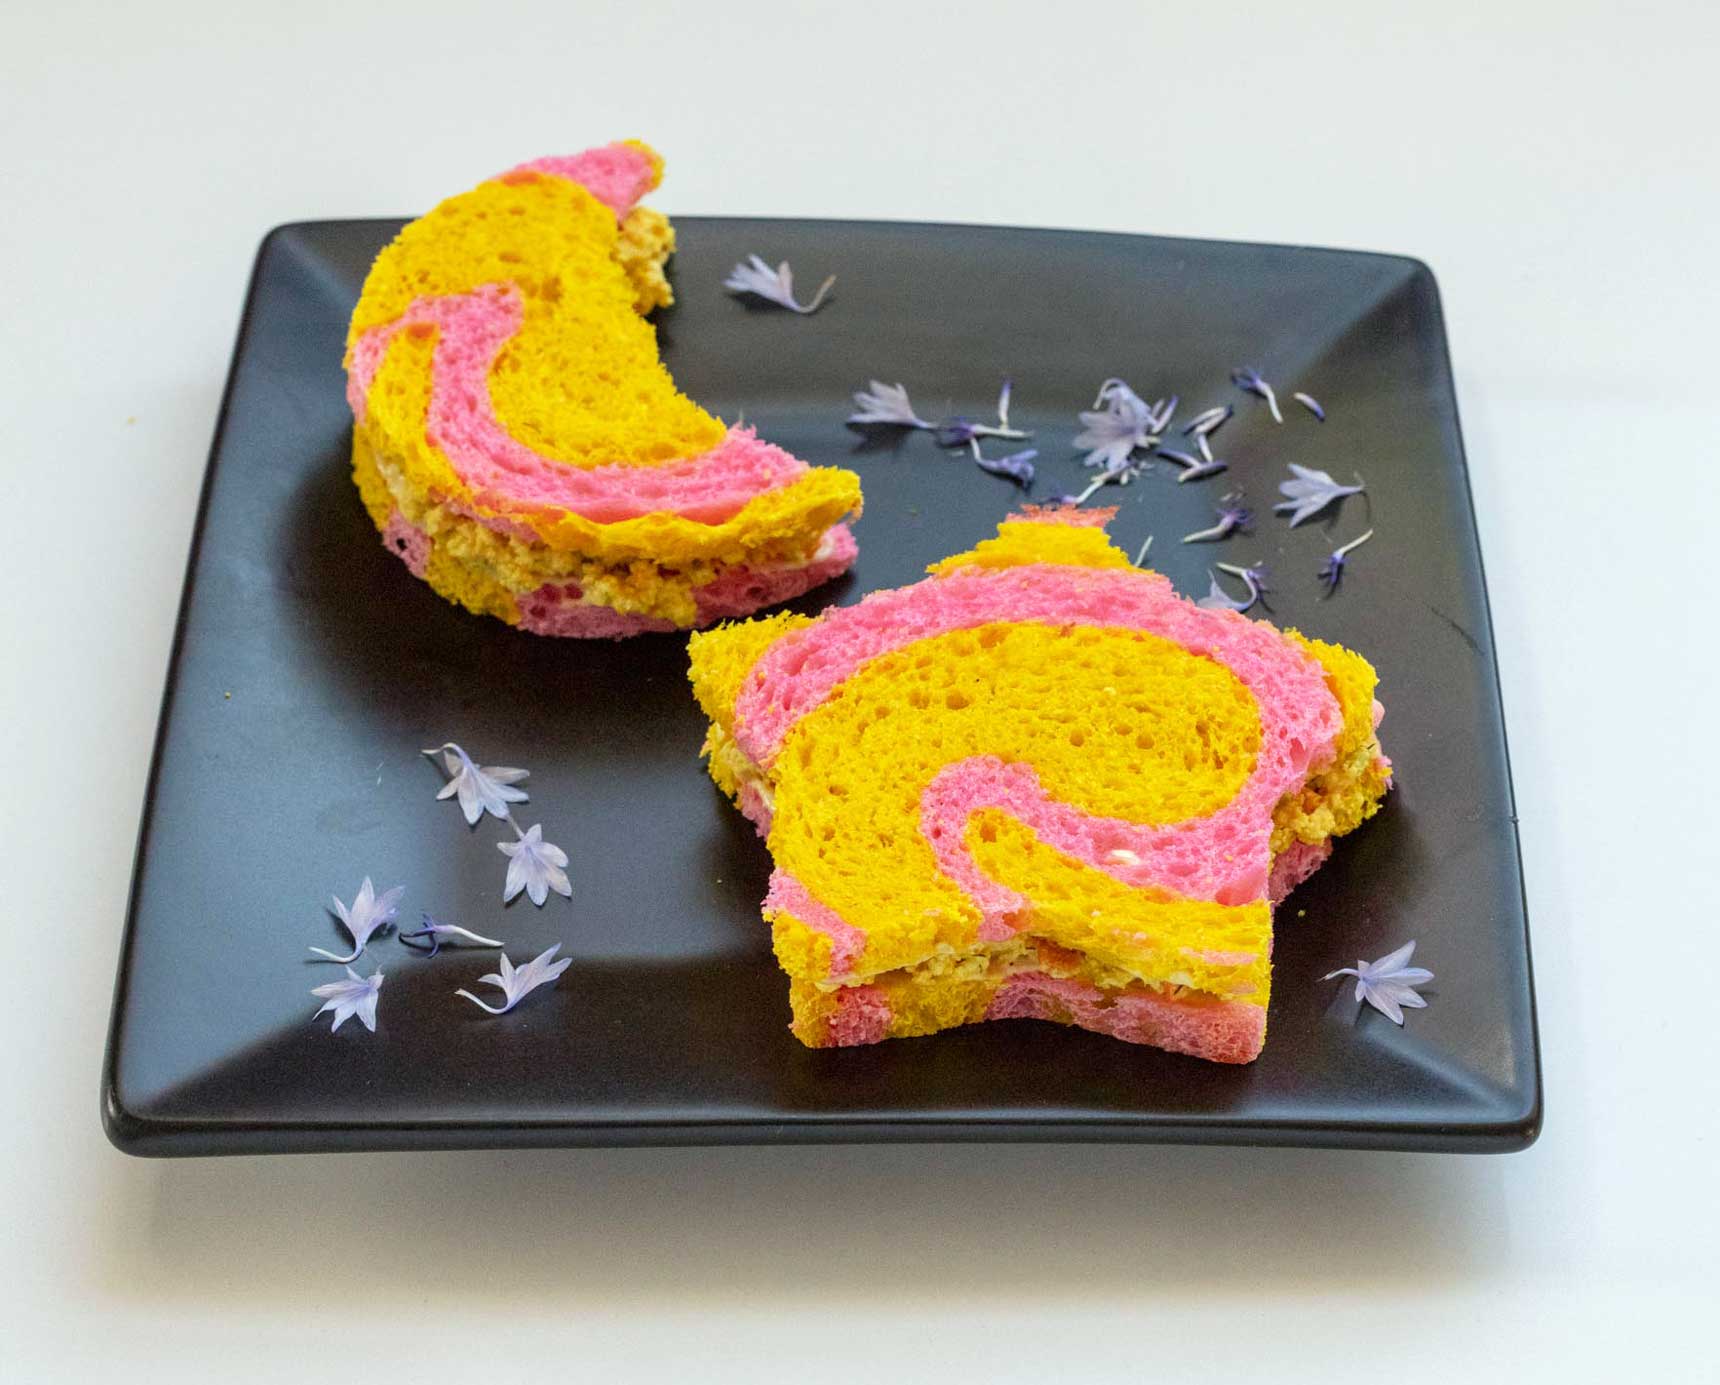 moon and star shaped tea sandwiches on pink and yellow bread.